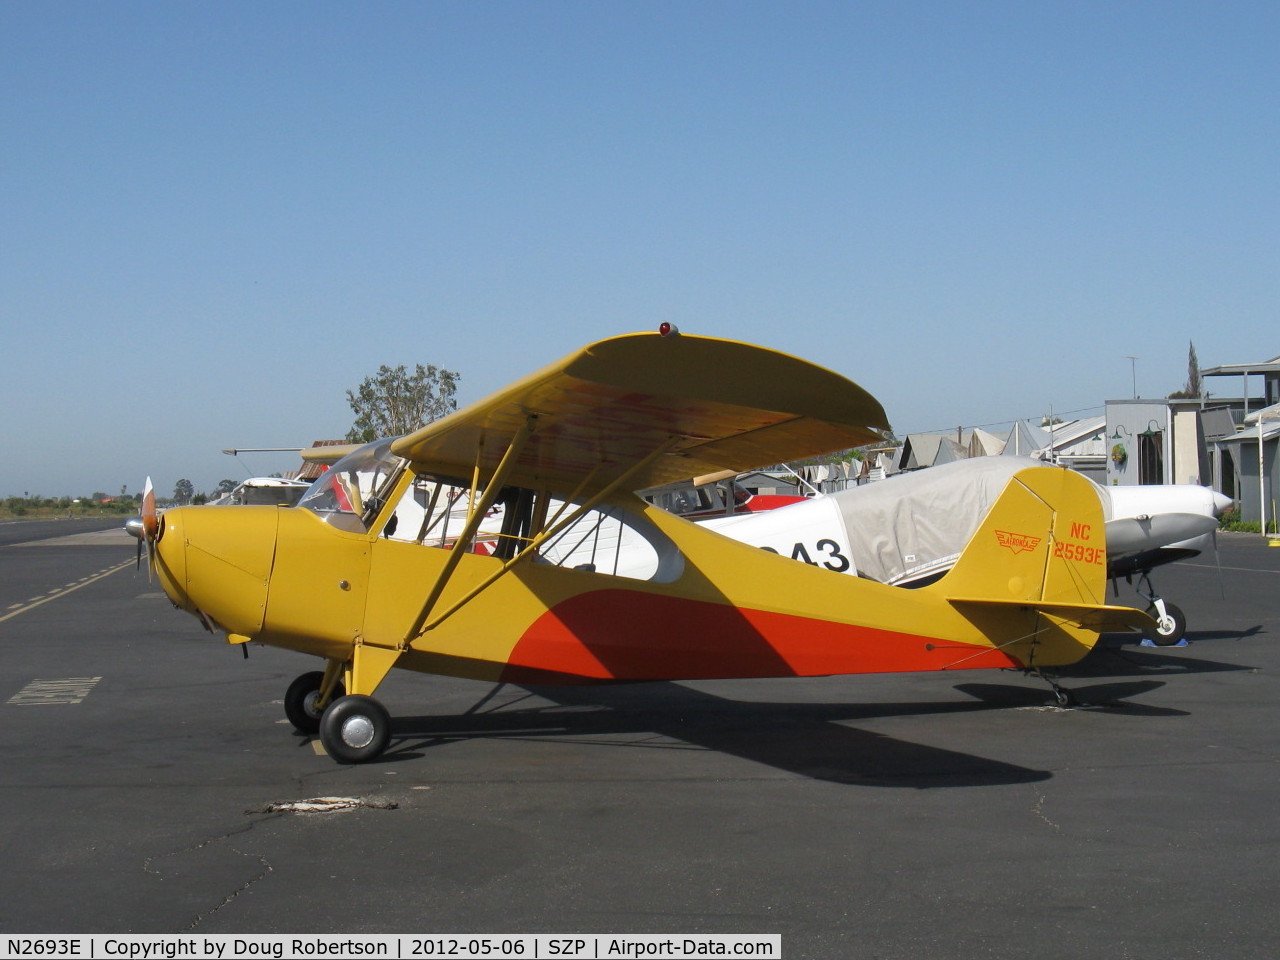 N2693E, 1946 Champion 7CCM C/N 7AC-6273, 1946 Aeronca 7CCM CHAMPION conversion from 7AC, Continental C90 90 Hp upgrade from C65, the 7CCM model was first produced in 1948. All 7ACs had this same color yellow/red trim scheme. South Dakota visitor.